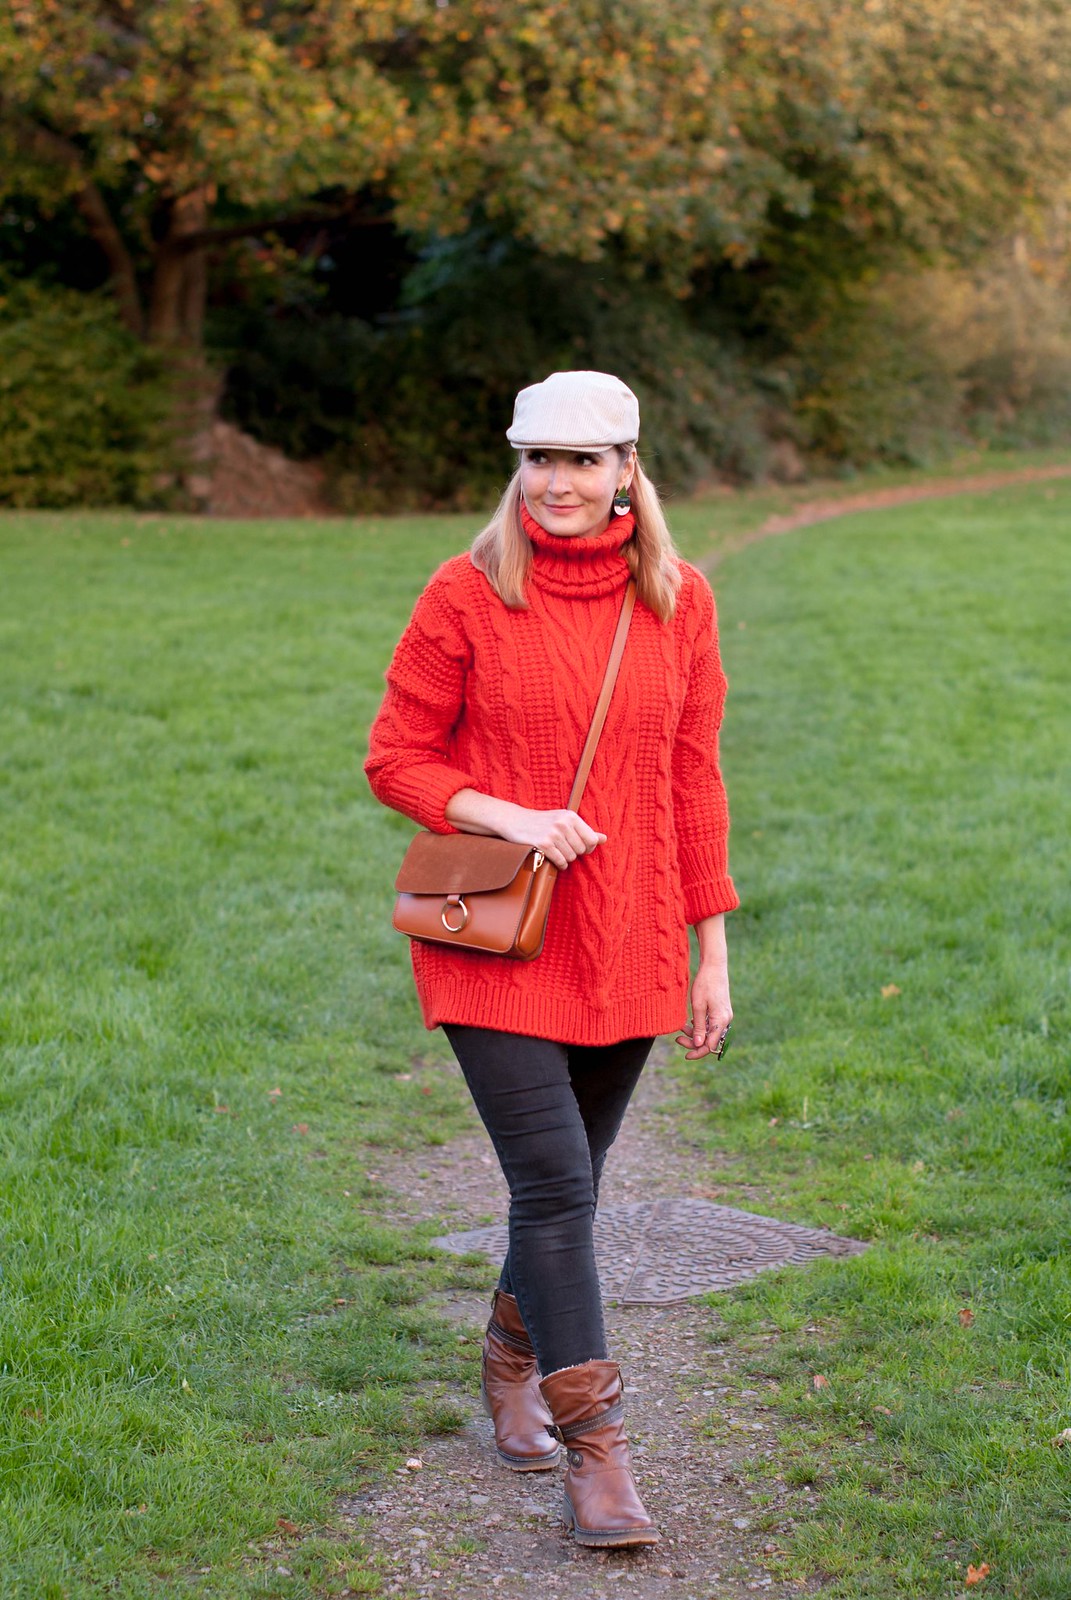 Cozy, comfy autumn fall outfit for walking the dog long orange-red roll neck sweater skinny jeans brown ankle boots flat cap | Not Dressed As Lamb, over 40 style